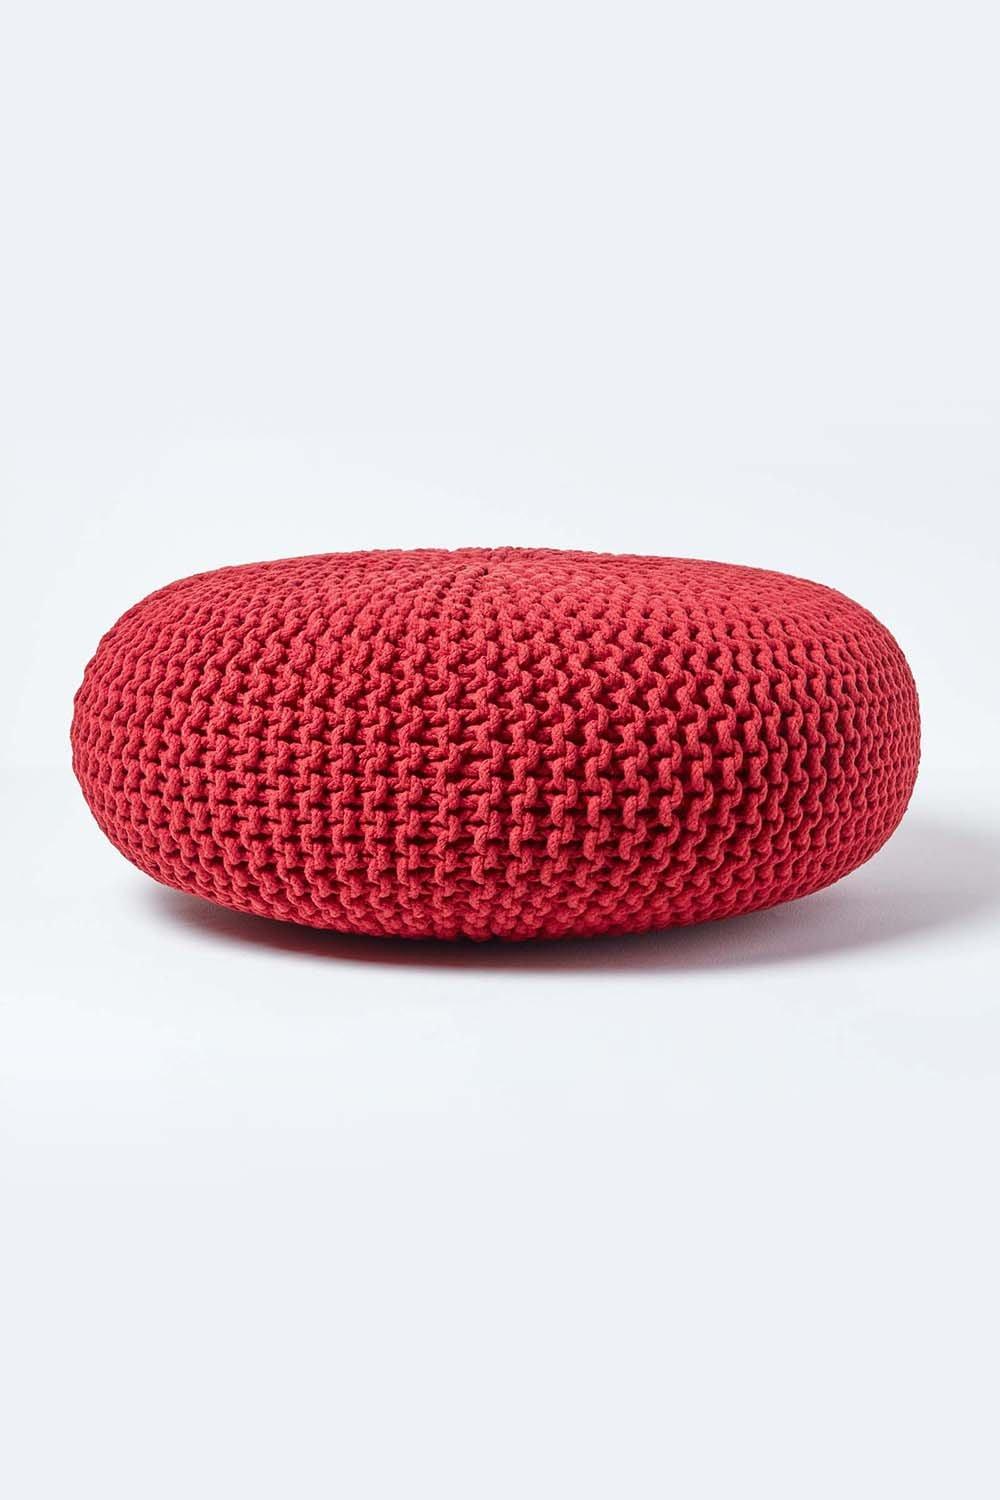 Homescapes Large Round Cotton Knitted Pouffe Footstool|red